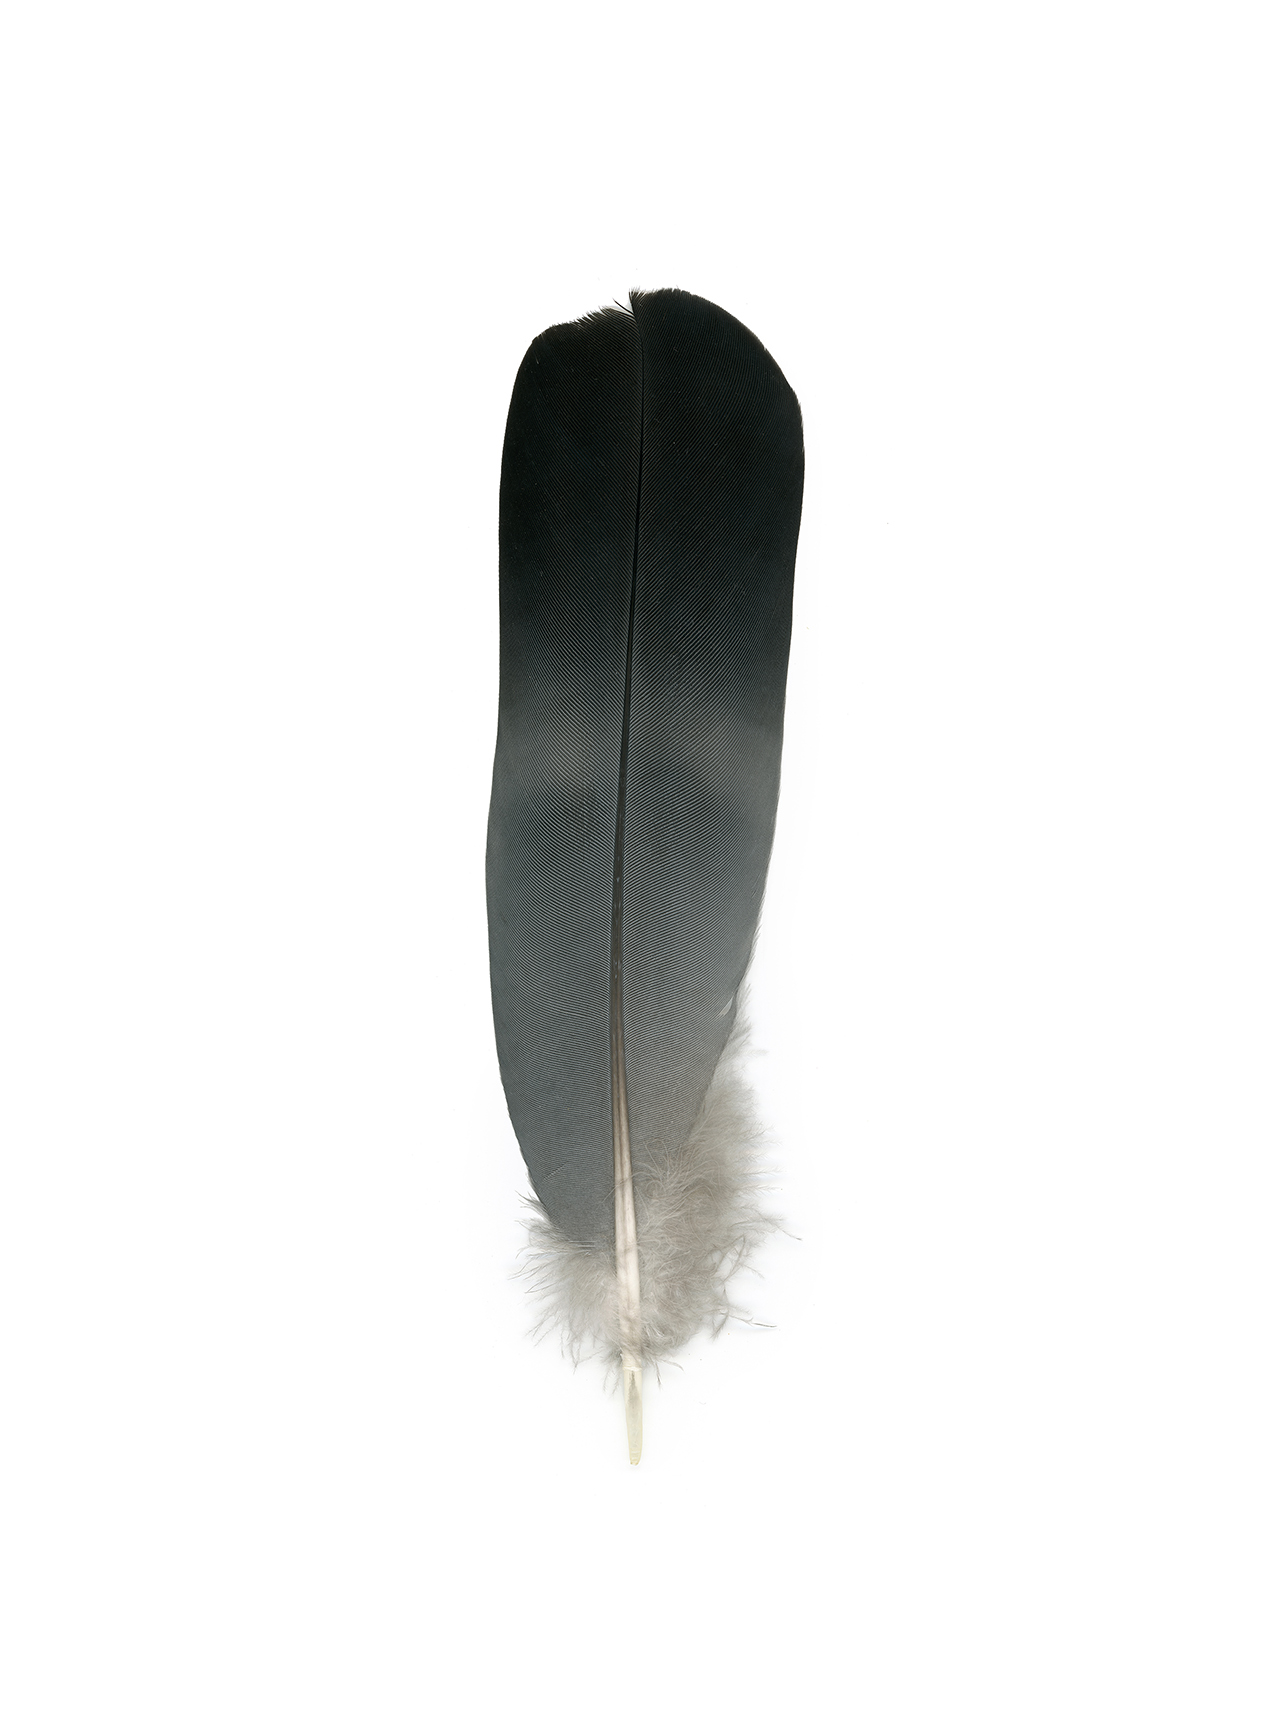 feather2